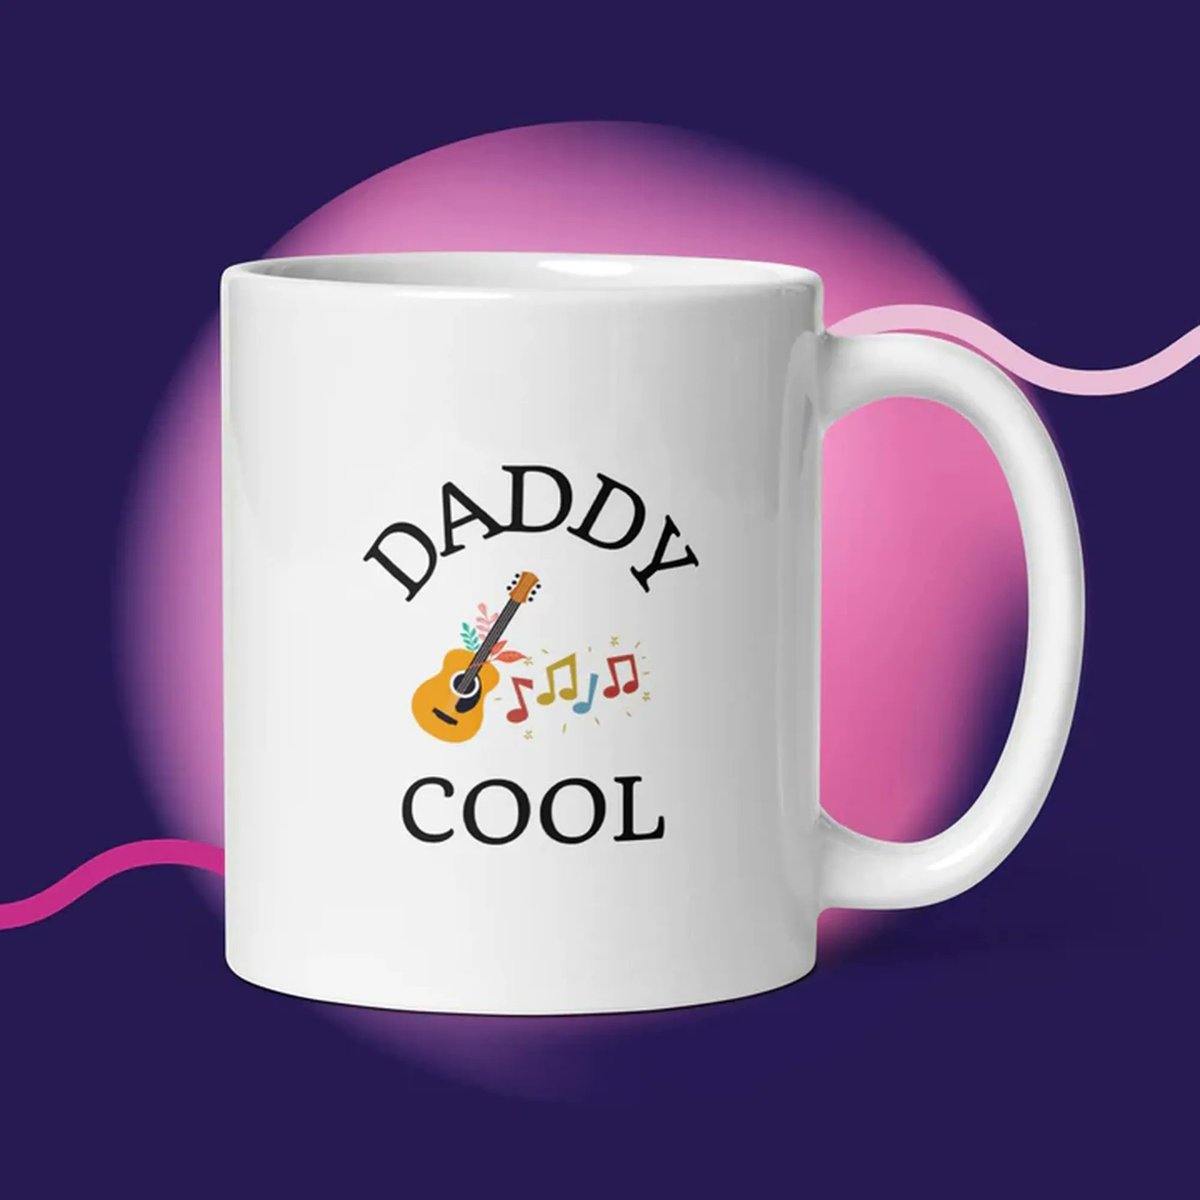 Get Father's Day Gifts at 20% off with code COOLDADS. 😍 Hurry, until Sunday only!
Check out this eye-catching Gen-X Dad 'The Coolest Dad' T-Shirt and more! ❤️🛍️
#hikerunner #GenXDad #CoolestDad #DadSwag  #FathersDay #fathersdaygifts 

Shop Now ⬇️⬇️⬇️
buff.ly/3qSFveY